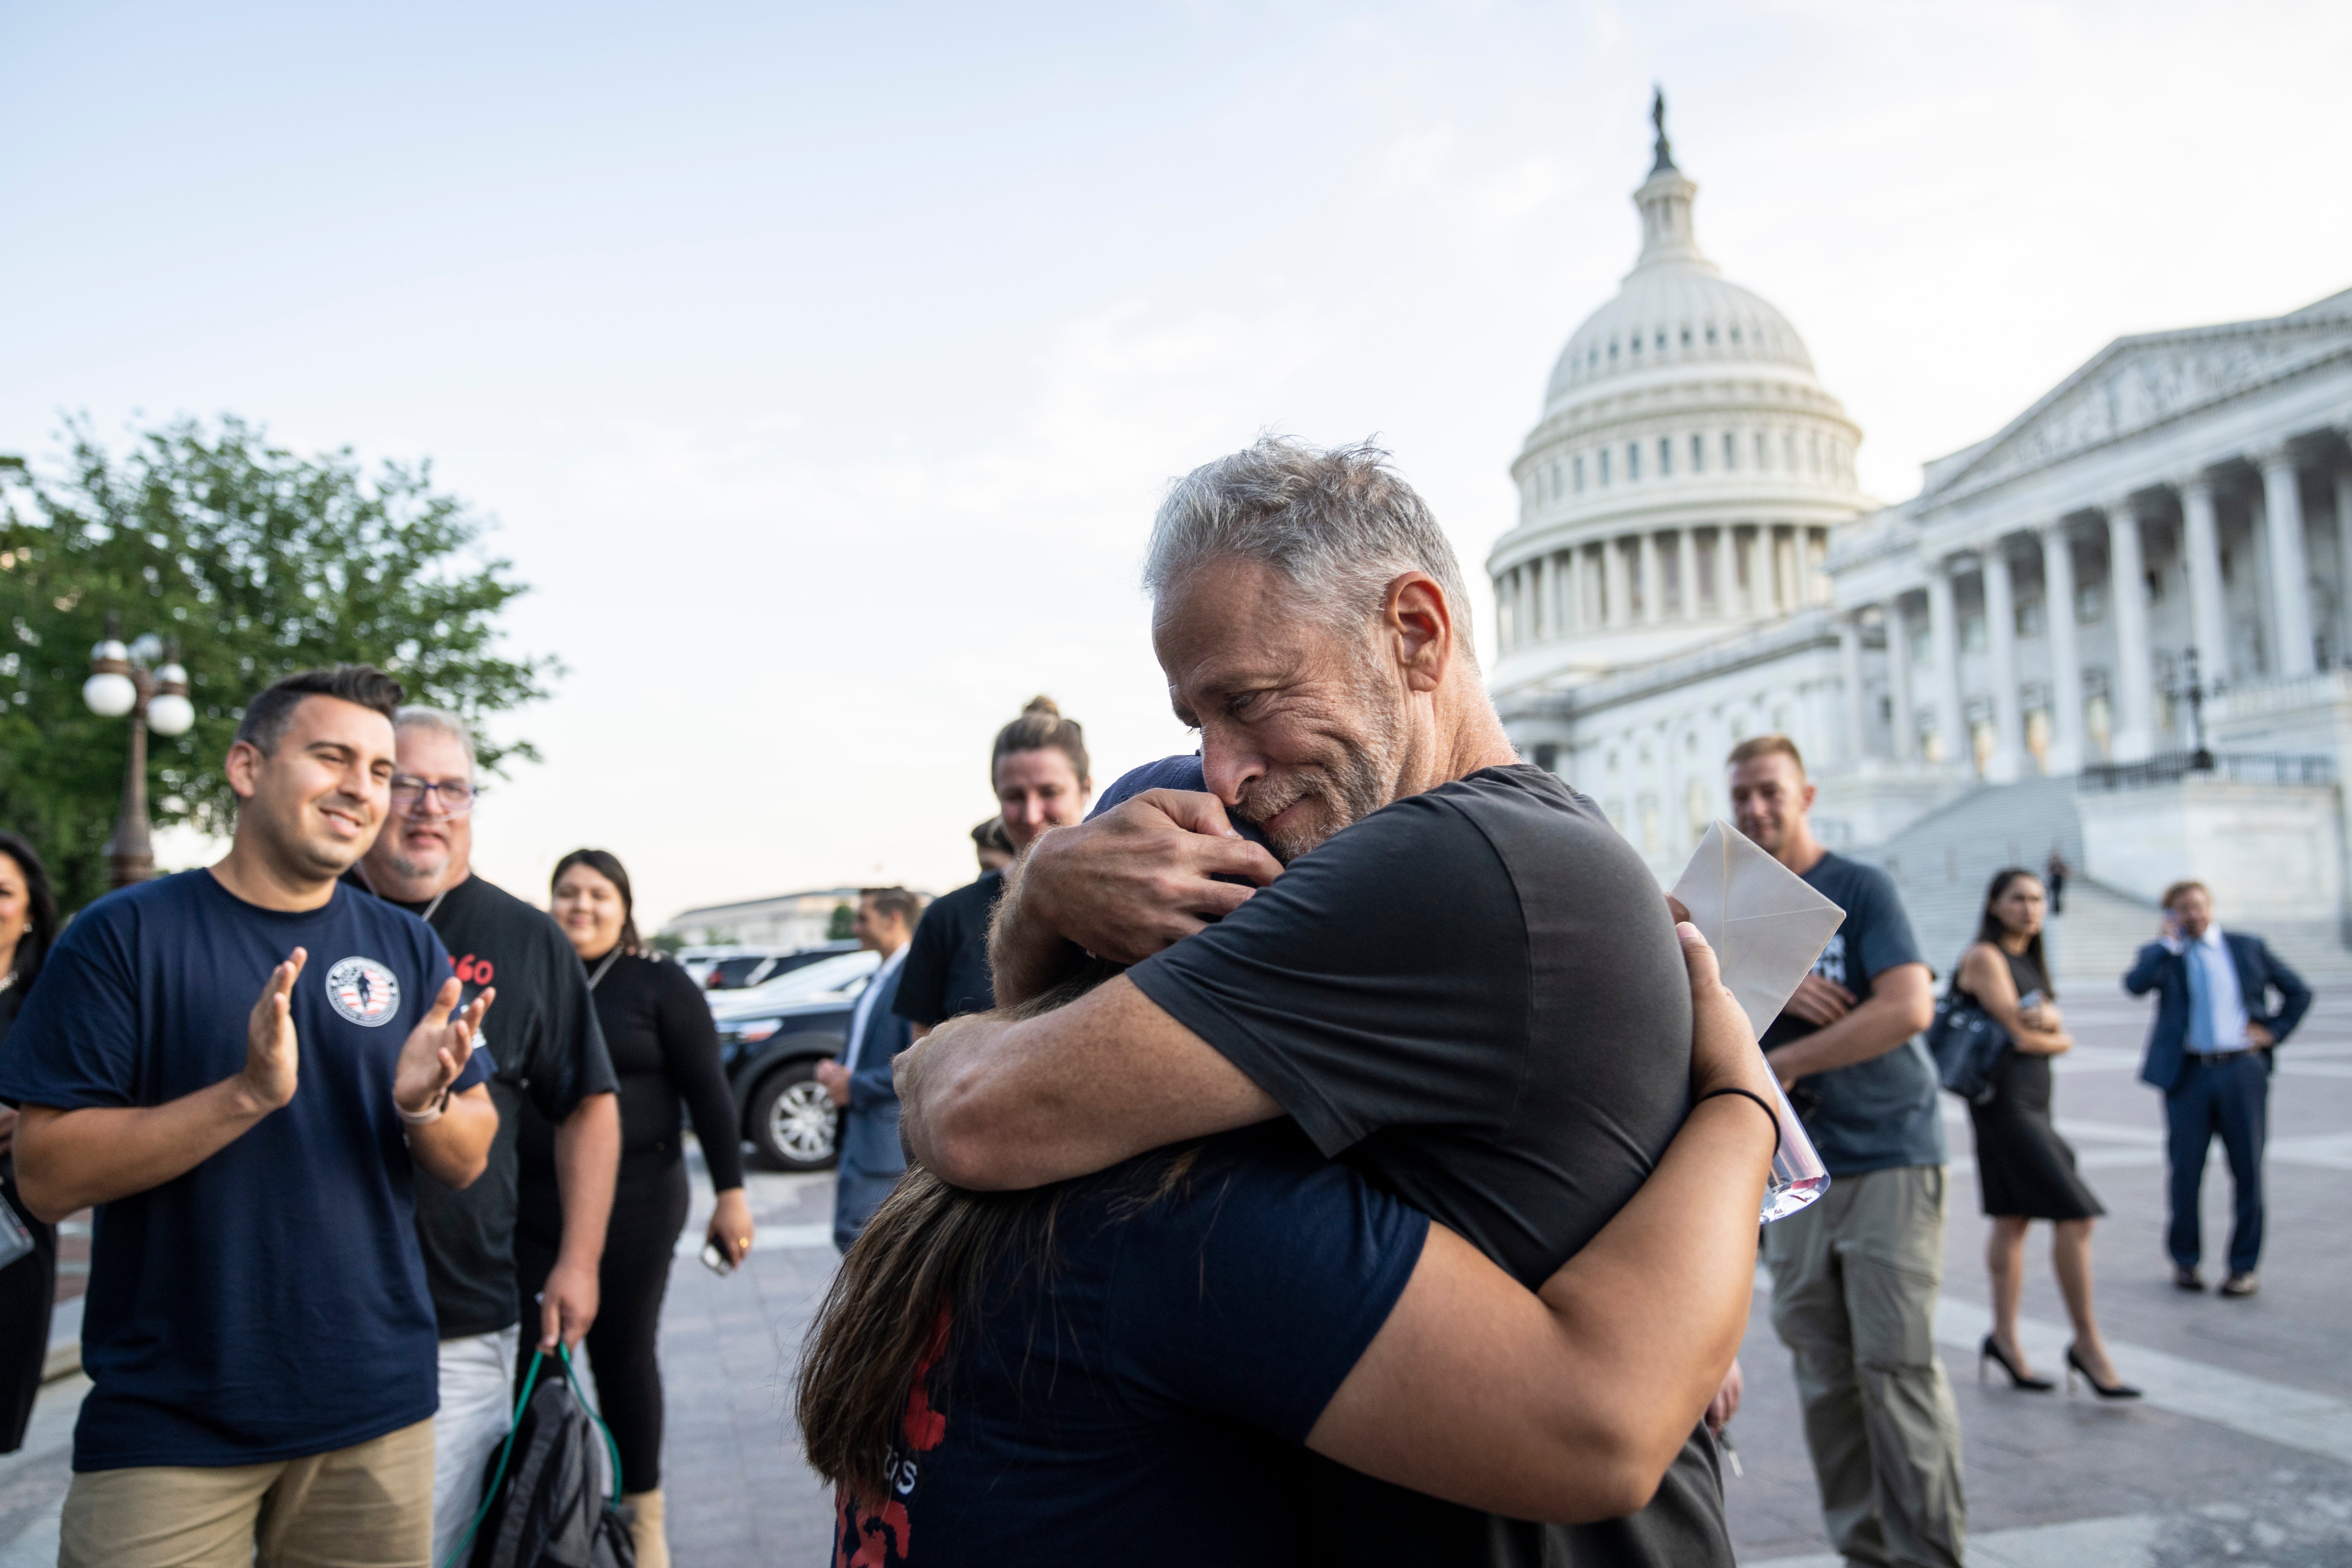 Comedian and activist Jon Stewart hugs Rosie Torres, wife of veteran Le Roy Torres who suffers from illnesses related to his exposure to burn pits in Iraq, after the Senate passed the PACT Act at the US Capitol August 2, 2022